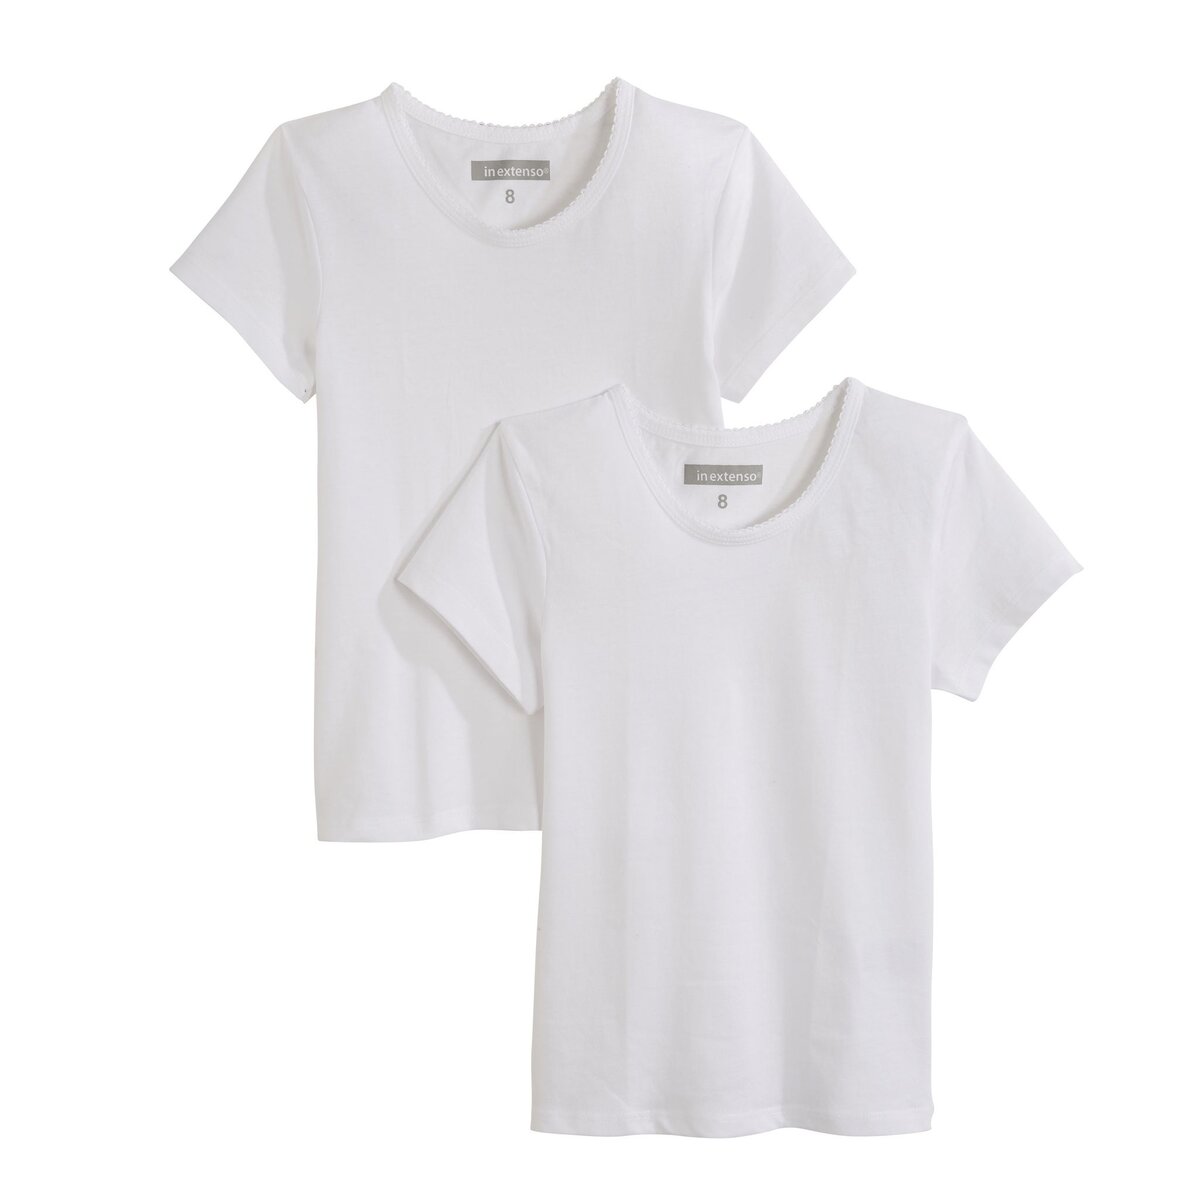 IN EXTENSO Lot de 2 tee shirts manches courtes fille 